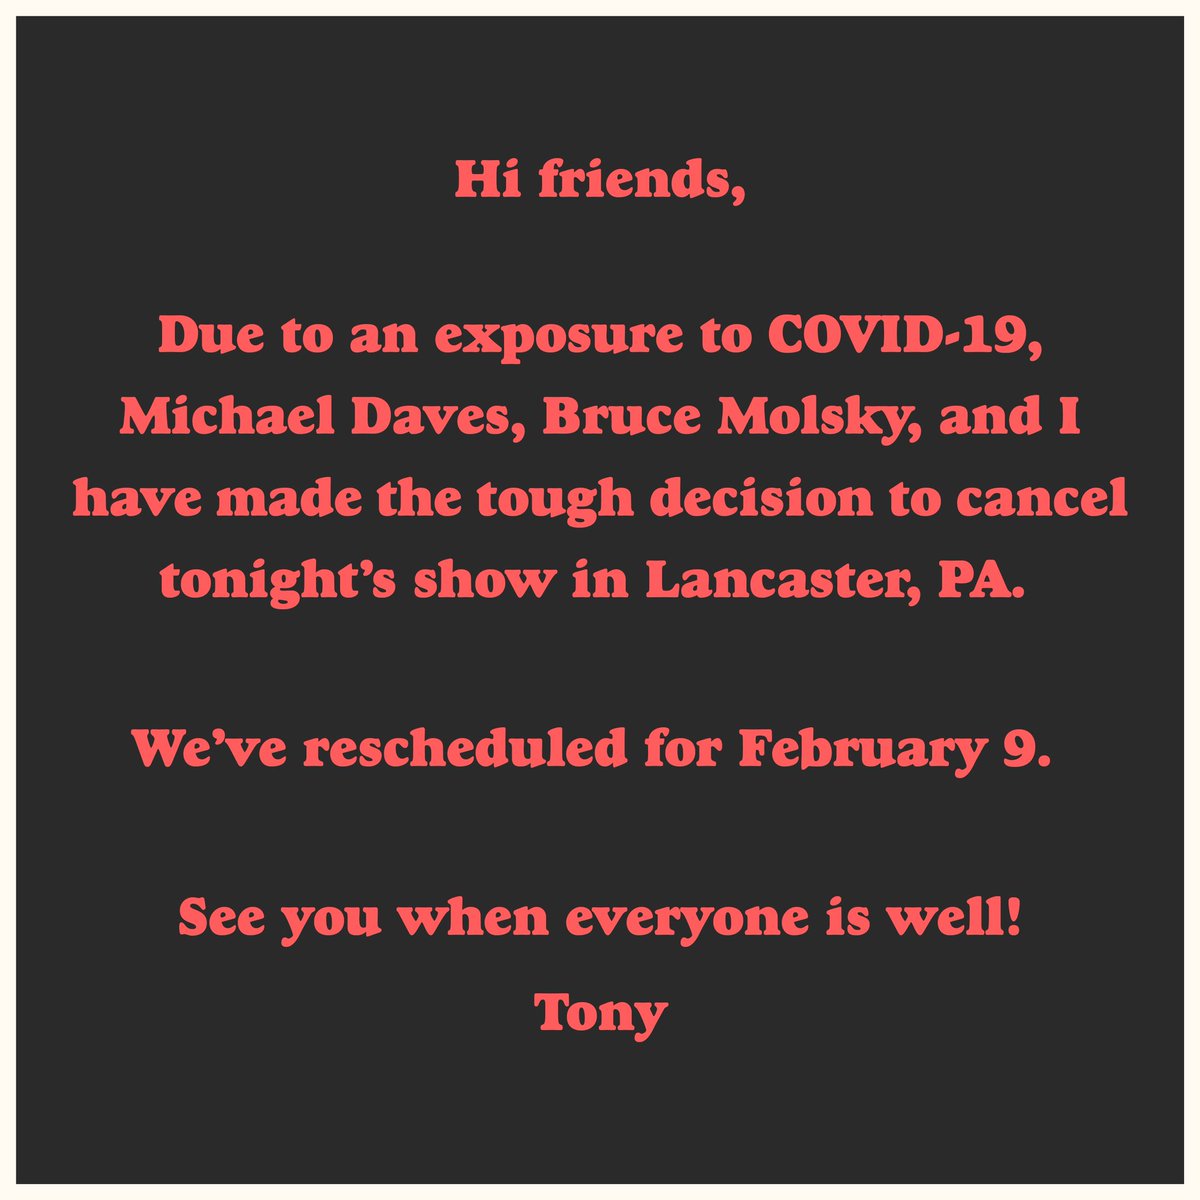 Update on tonight’s trio show with @michael_daves and @brucemolsky at @zoearthouse in Lancaster, PA. Sorry for the inconvenience and we can’t wait to be back in February. - Tony